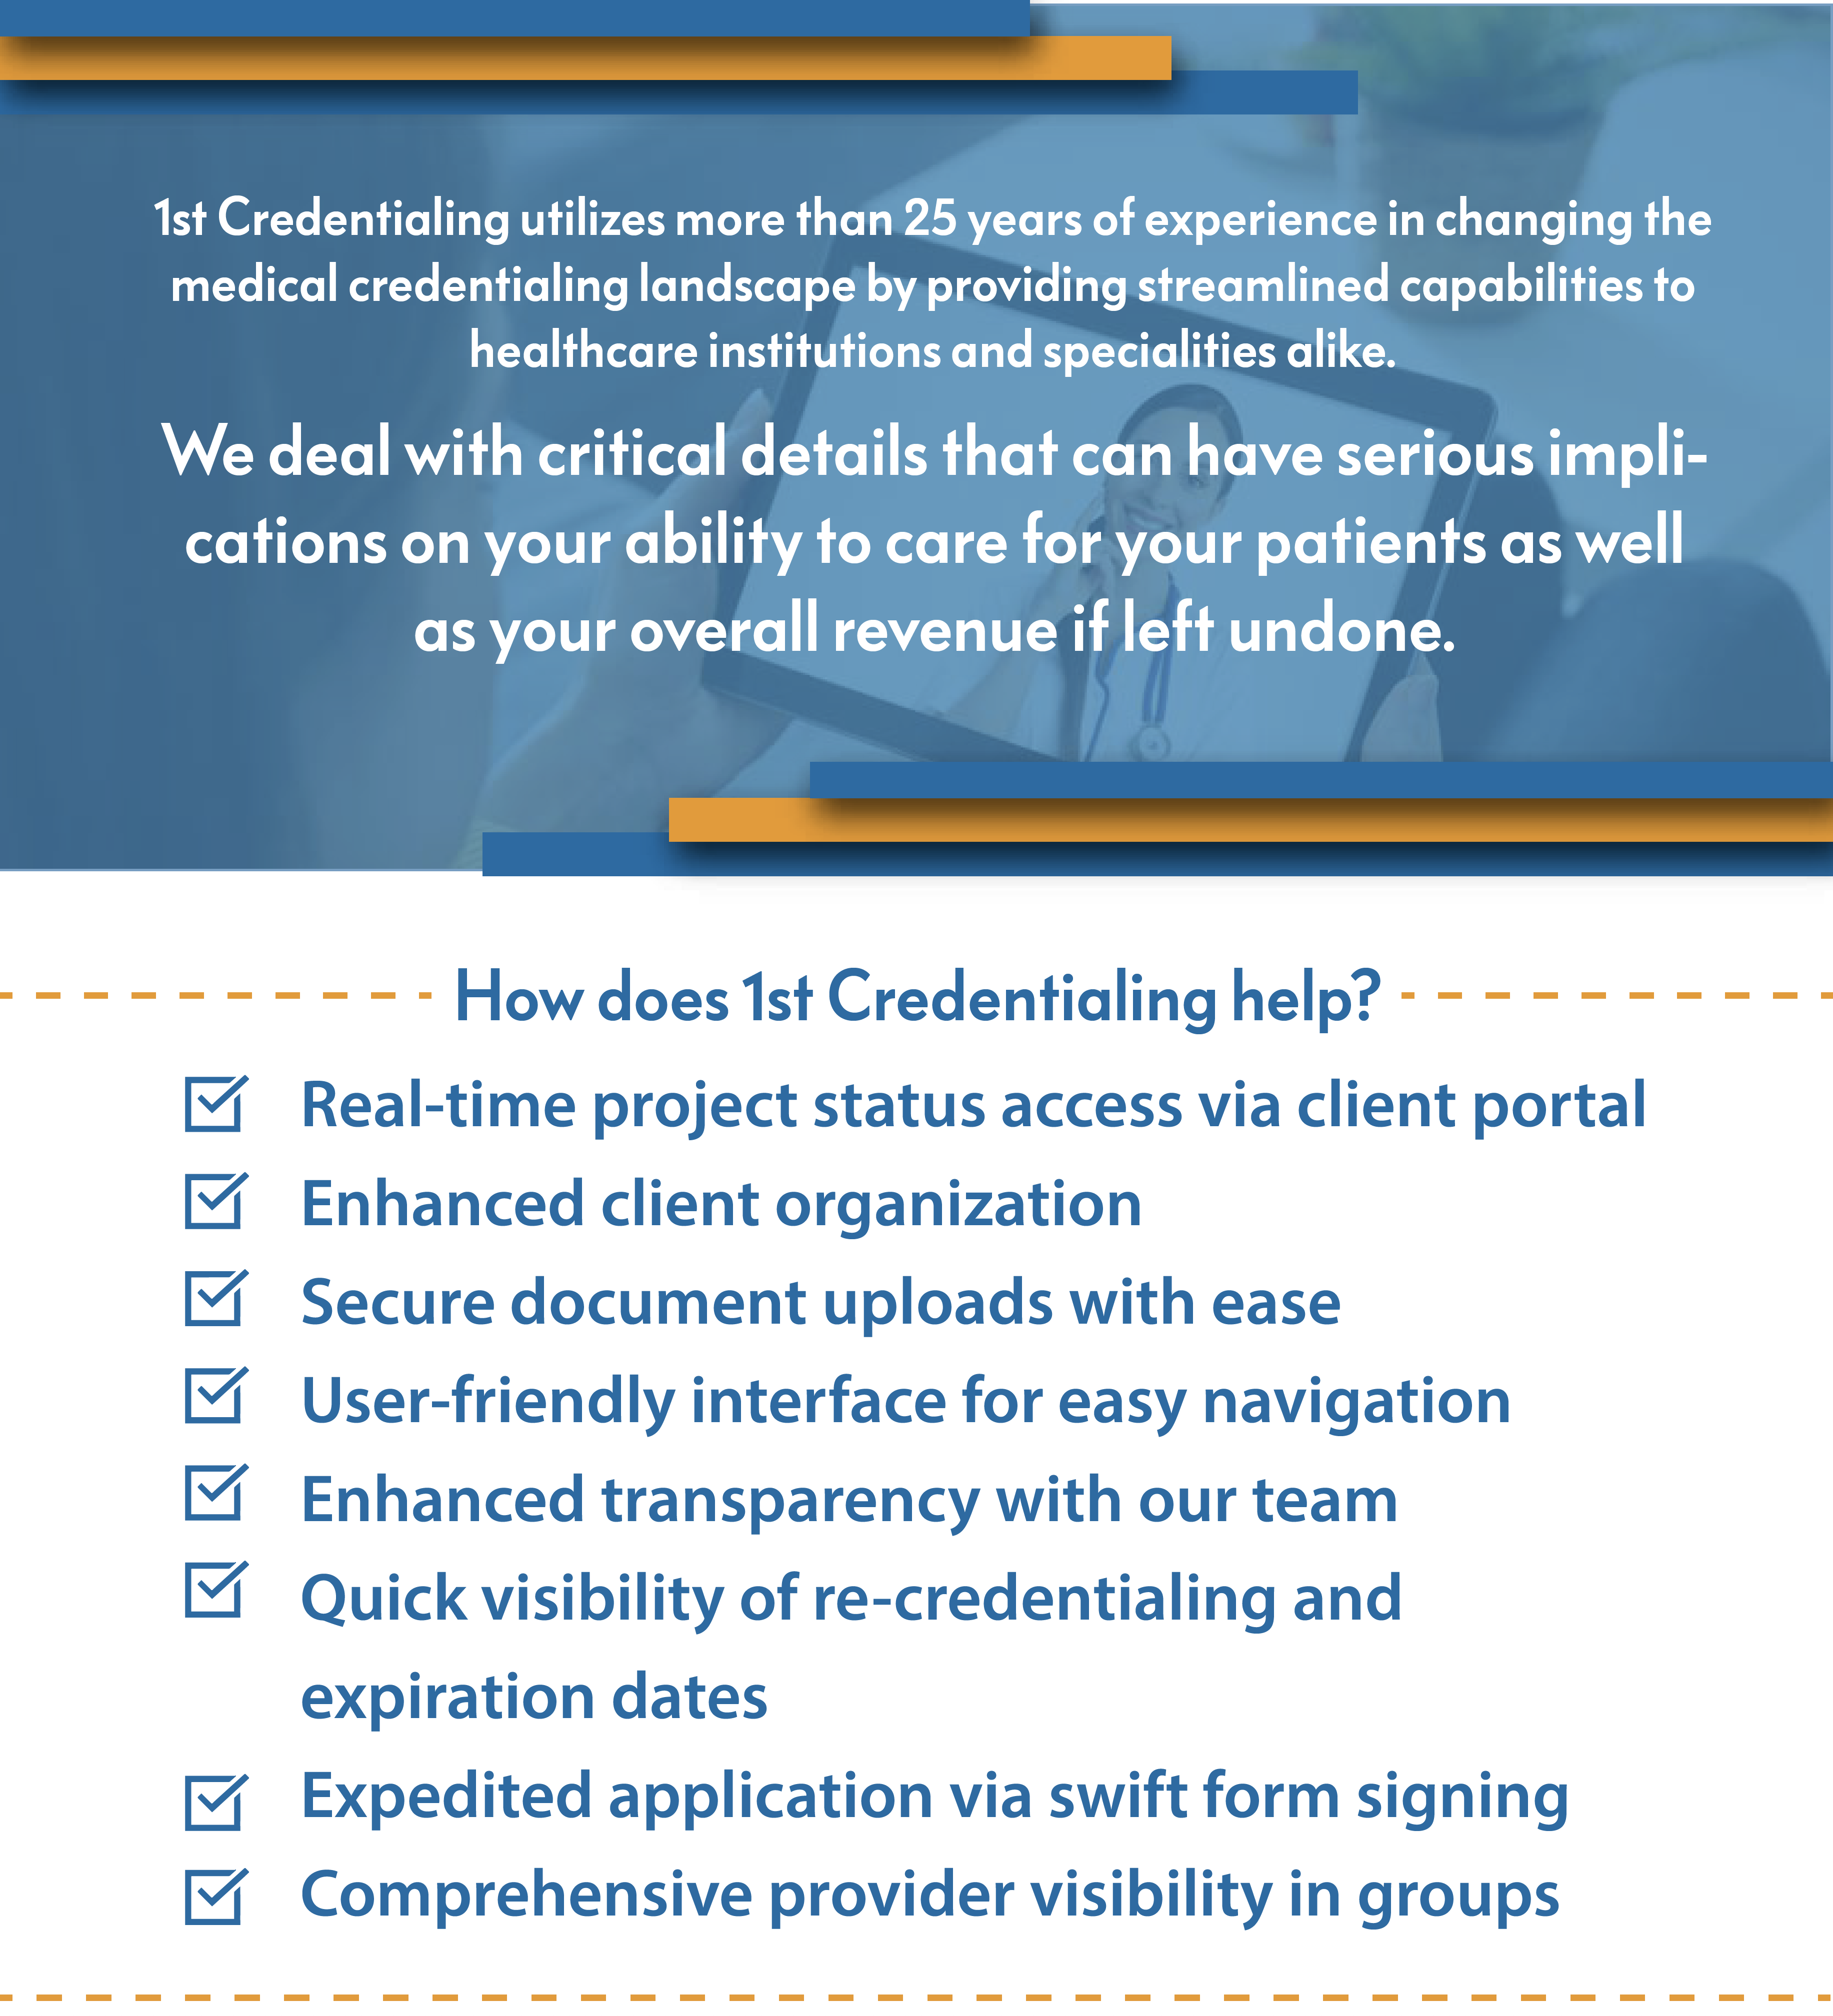 How does 1st Credentialing help?